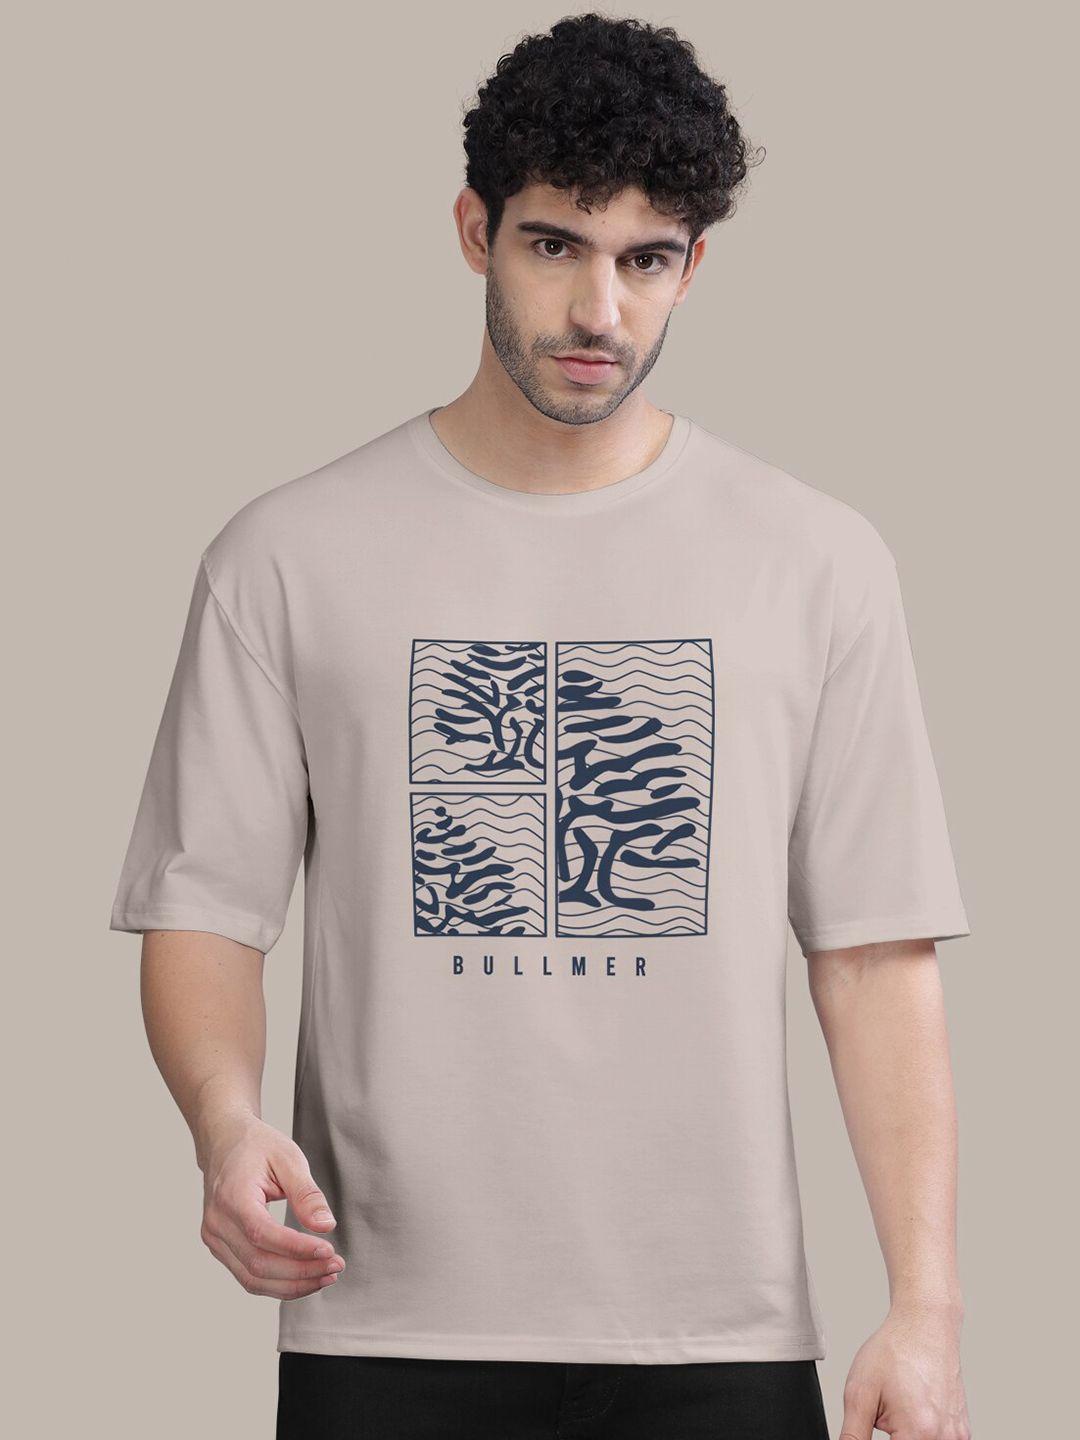 bullmer graphic printed oversized cotton t-shirt